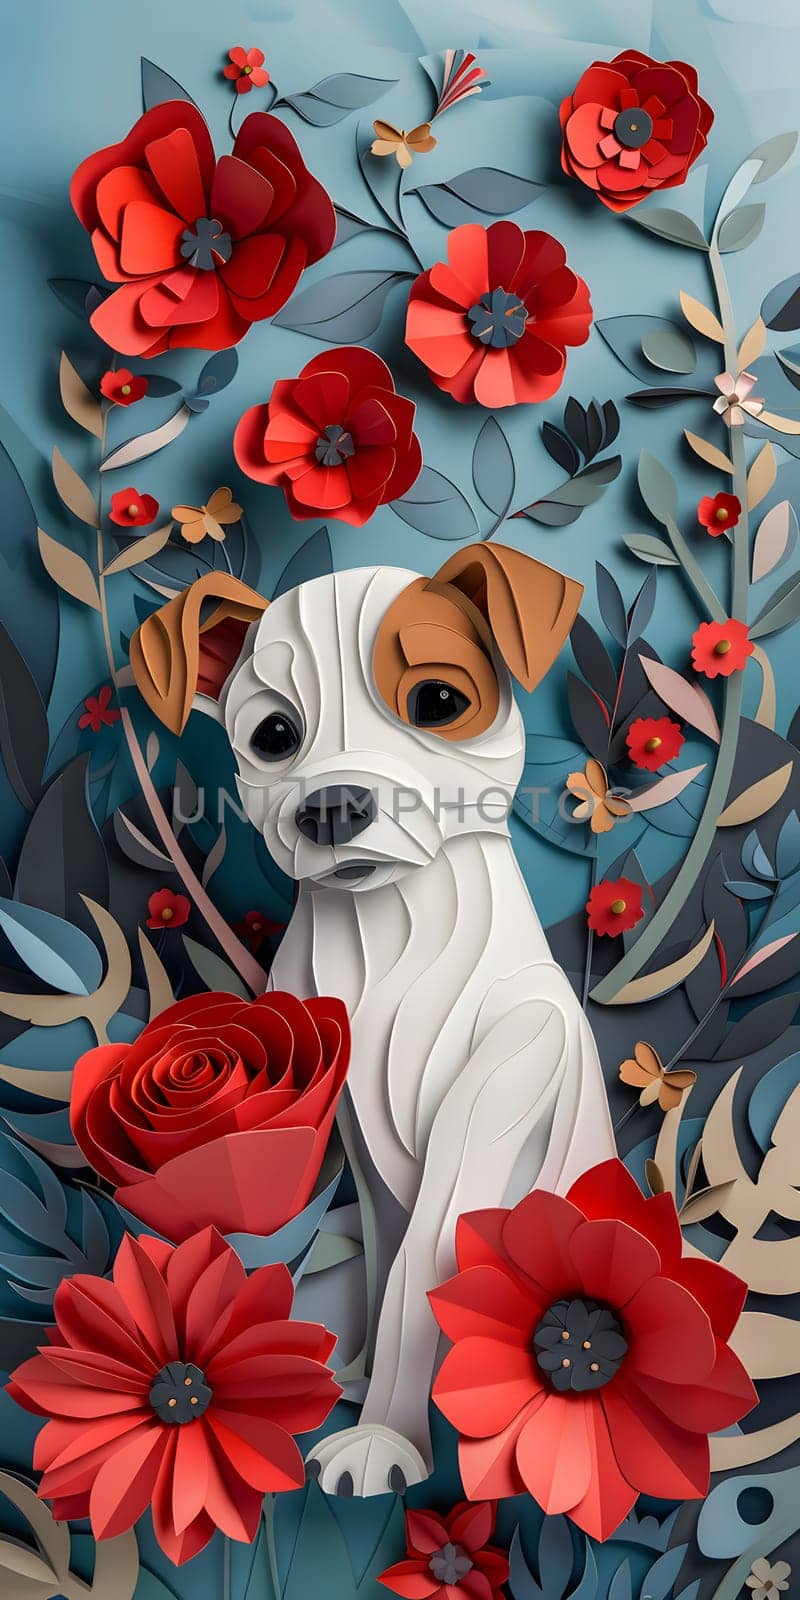 A Labrador Retriever is sitting amidst a field of vibrant red flowers, creating a picturesque scene worthy of being captured in a painting